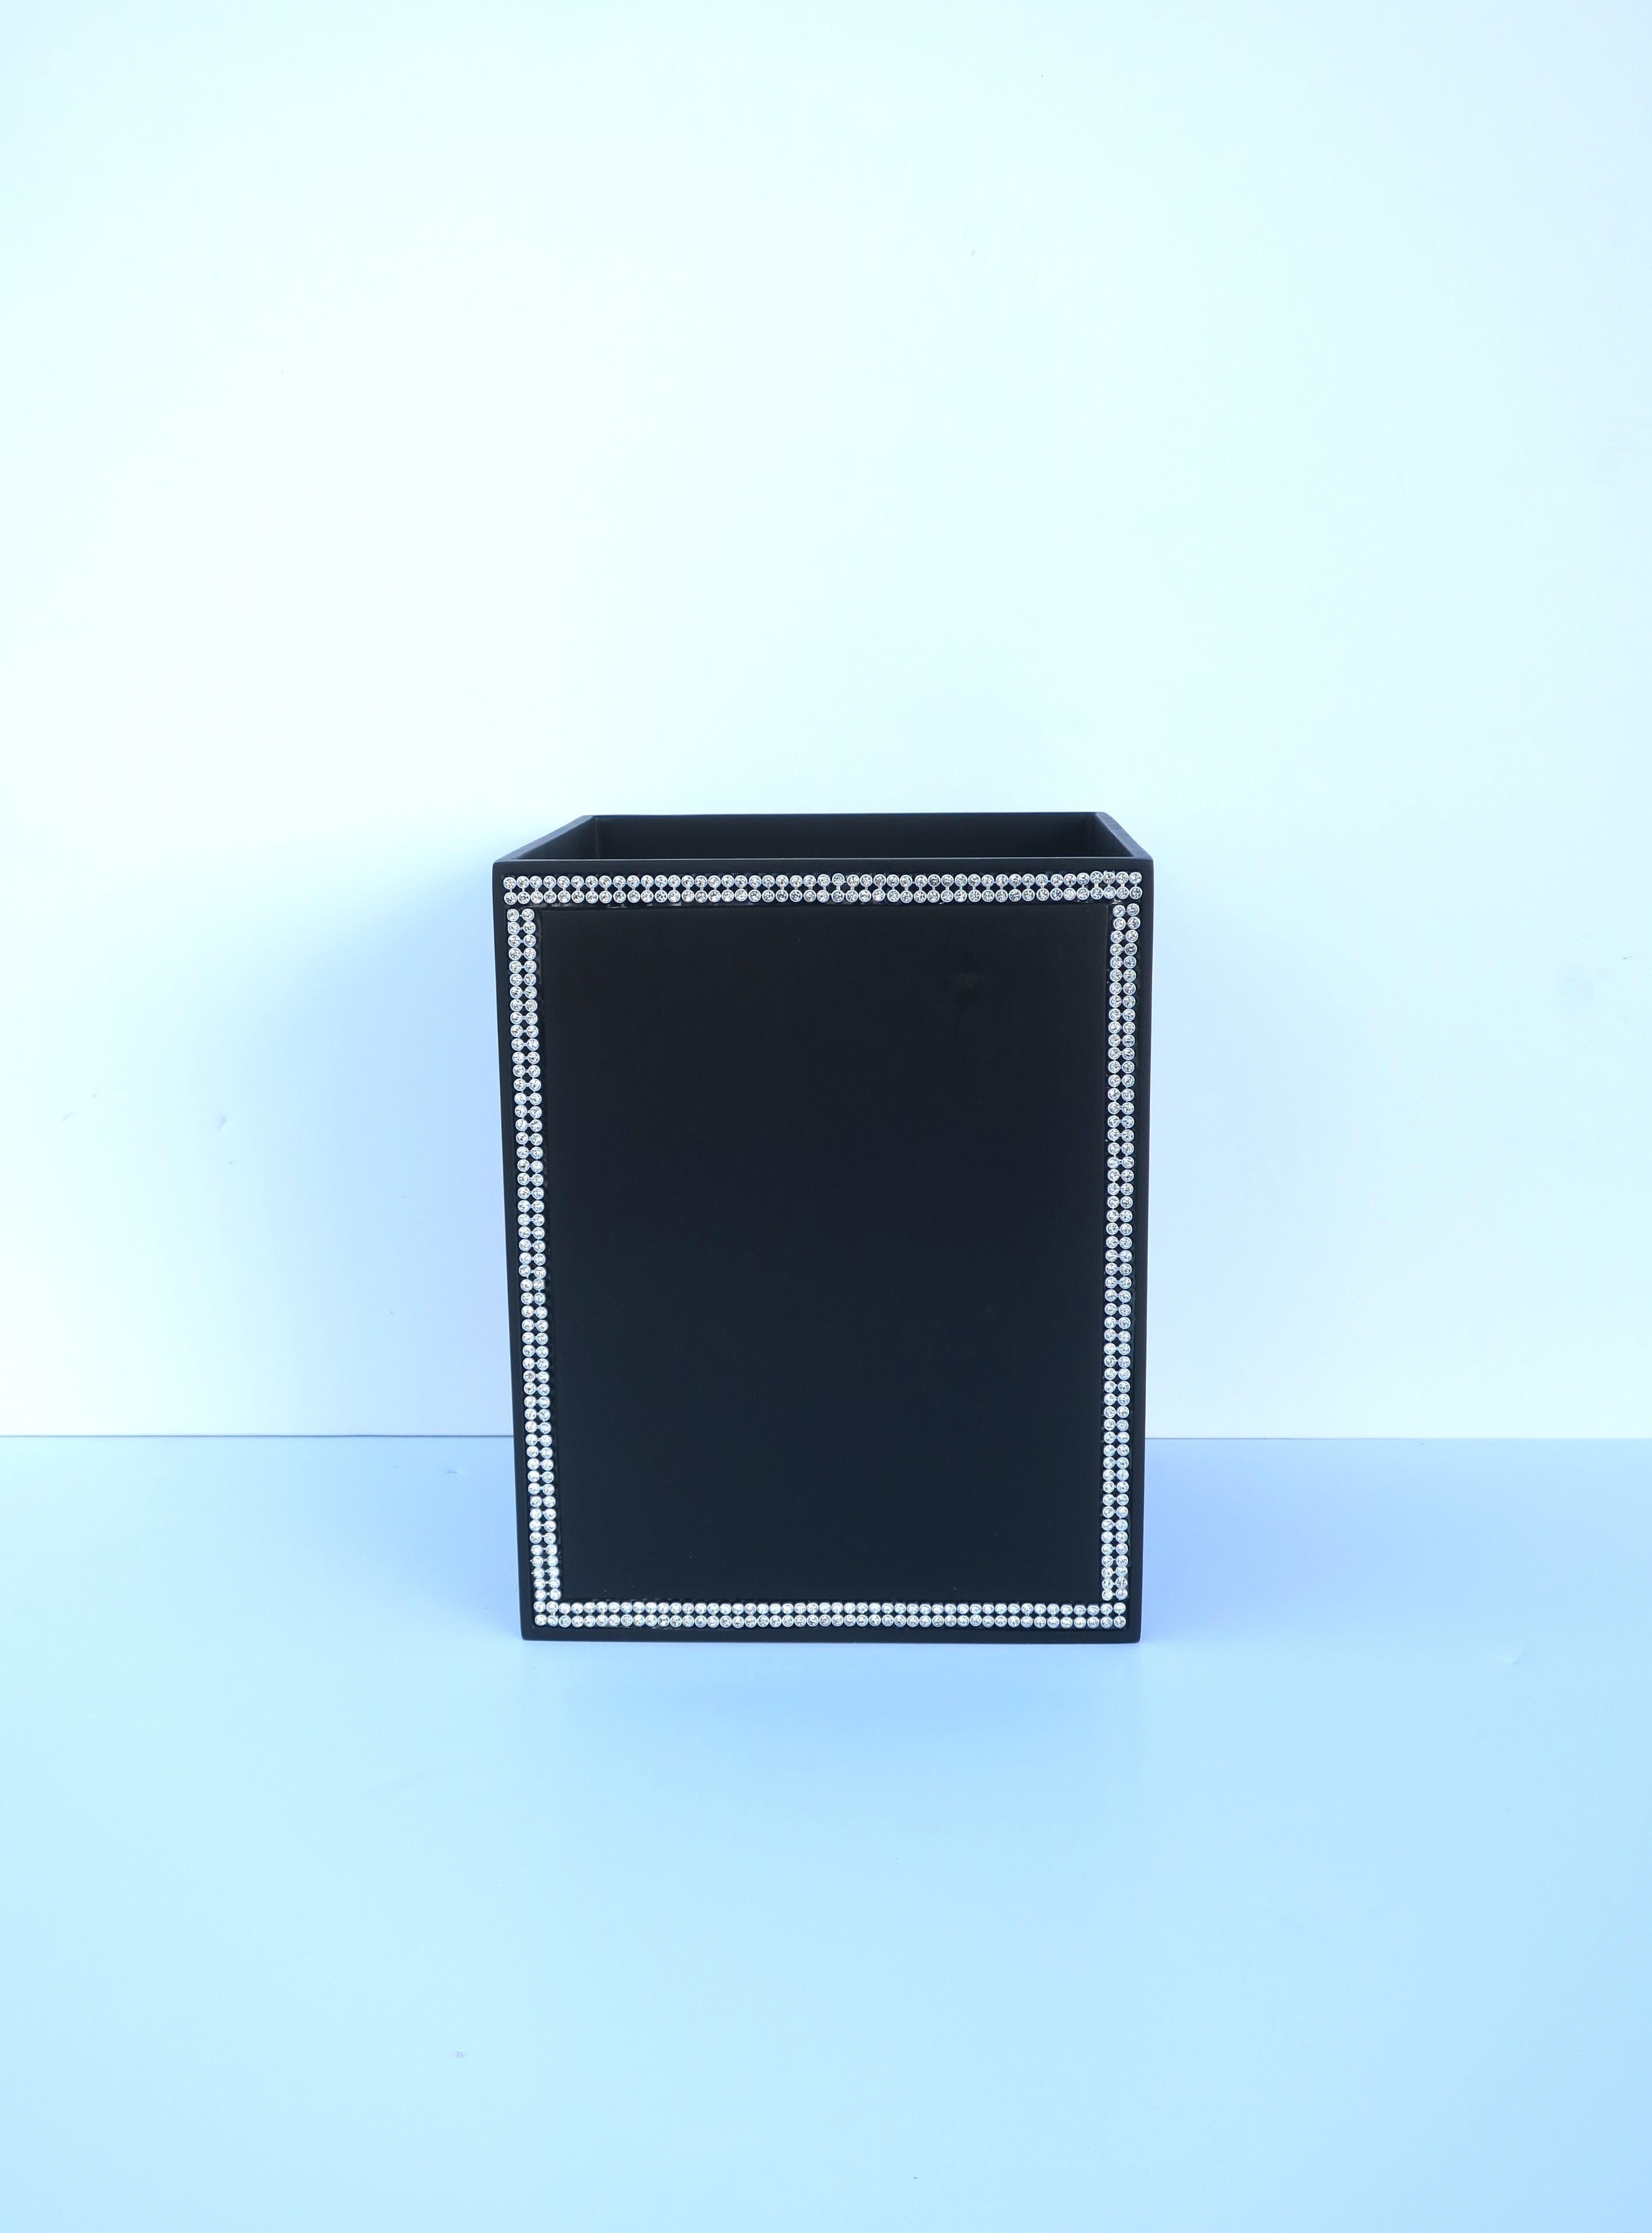 A black wastebasket or trash can with faux-diamond design. Trash can is a black powder-coated metal with faux diamond design on two sides. Piece has never been used. A great piece for a bathroom, powder room, office, walk-in closet, etc. Very good